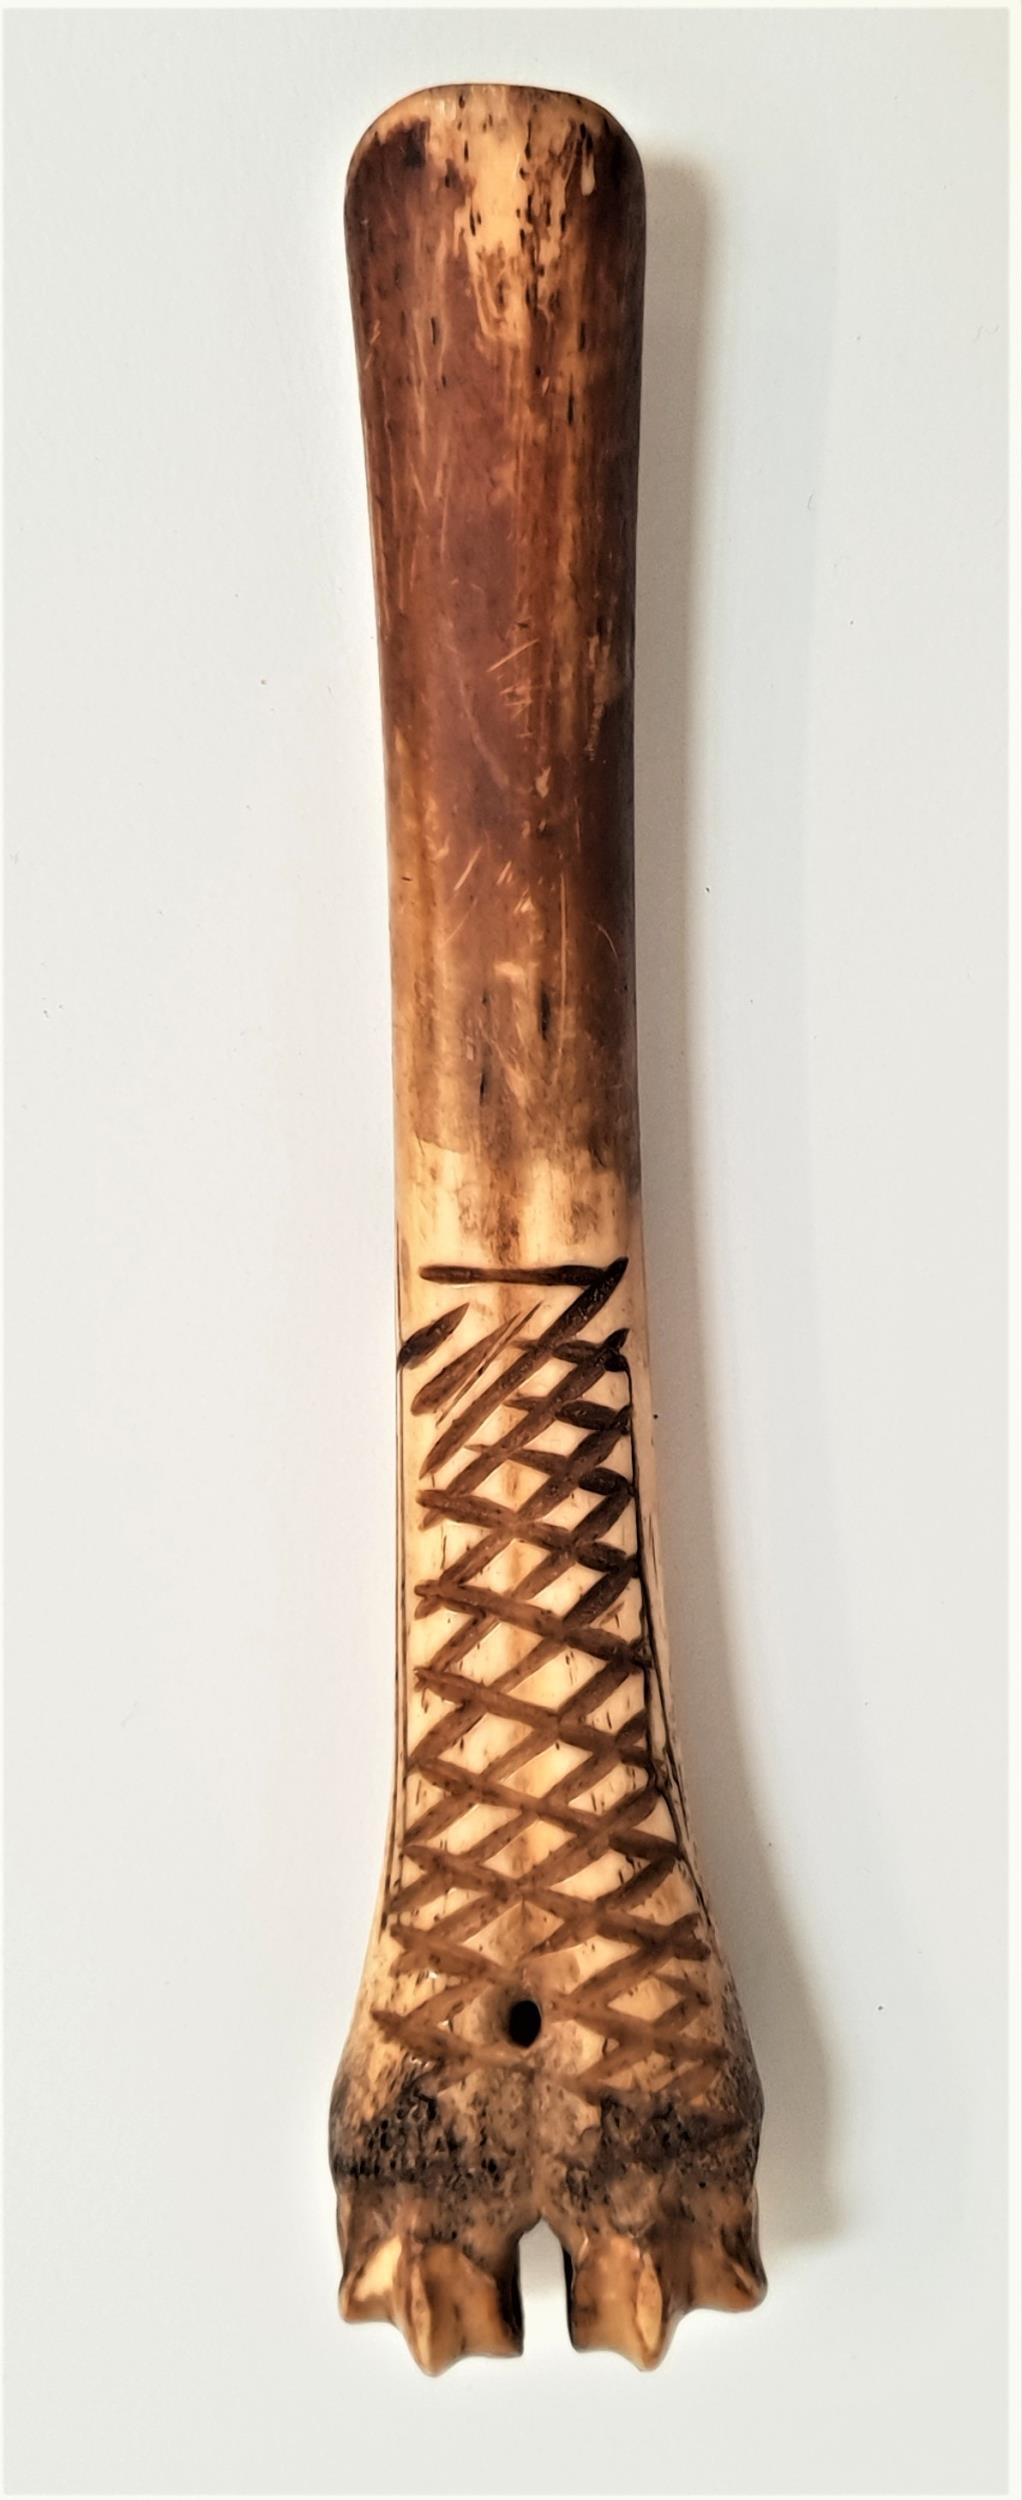 19th CENTURY CARVED BONE CHEESE SCOOP with lattice style carved decoration, 14cm long